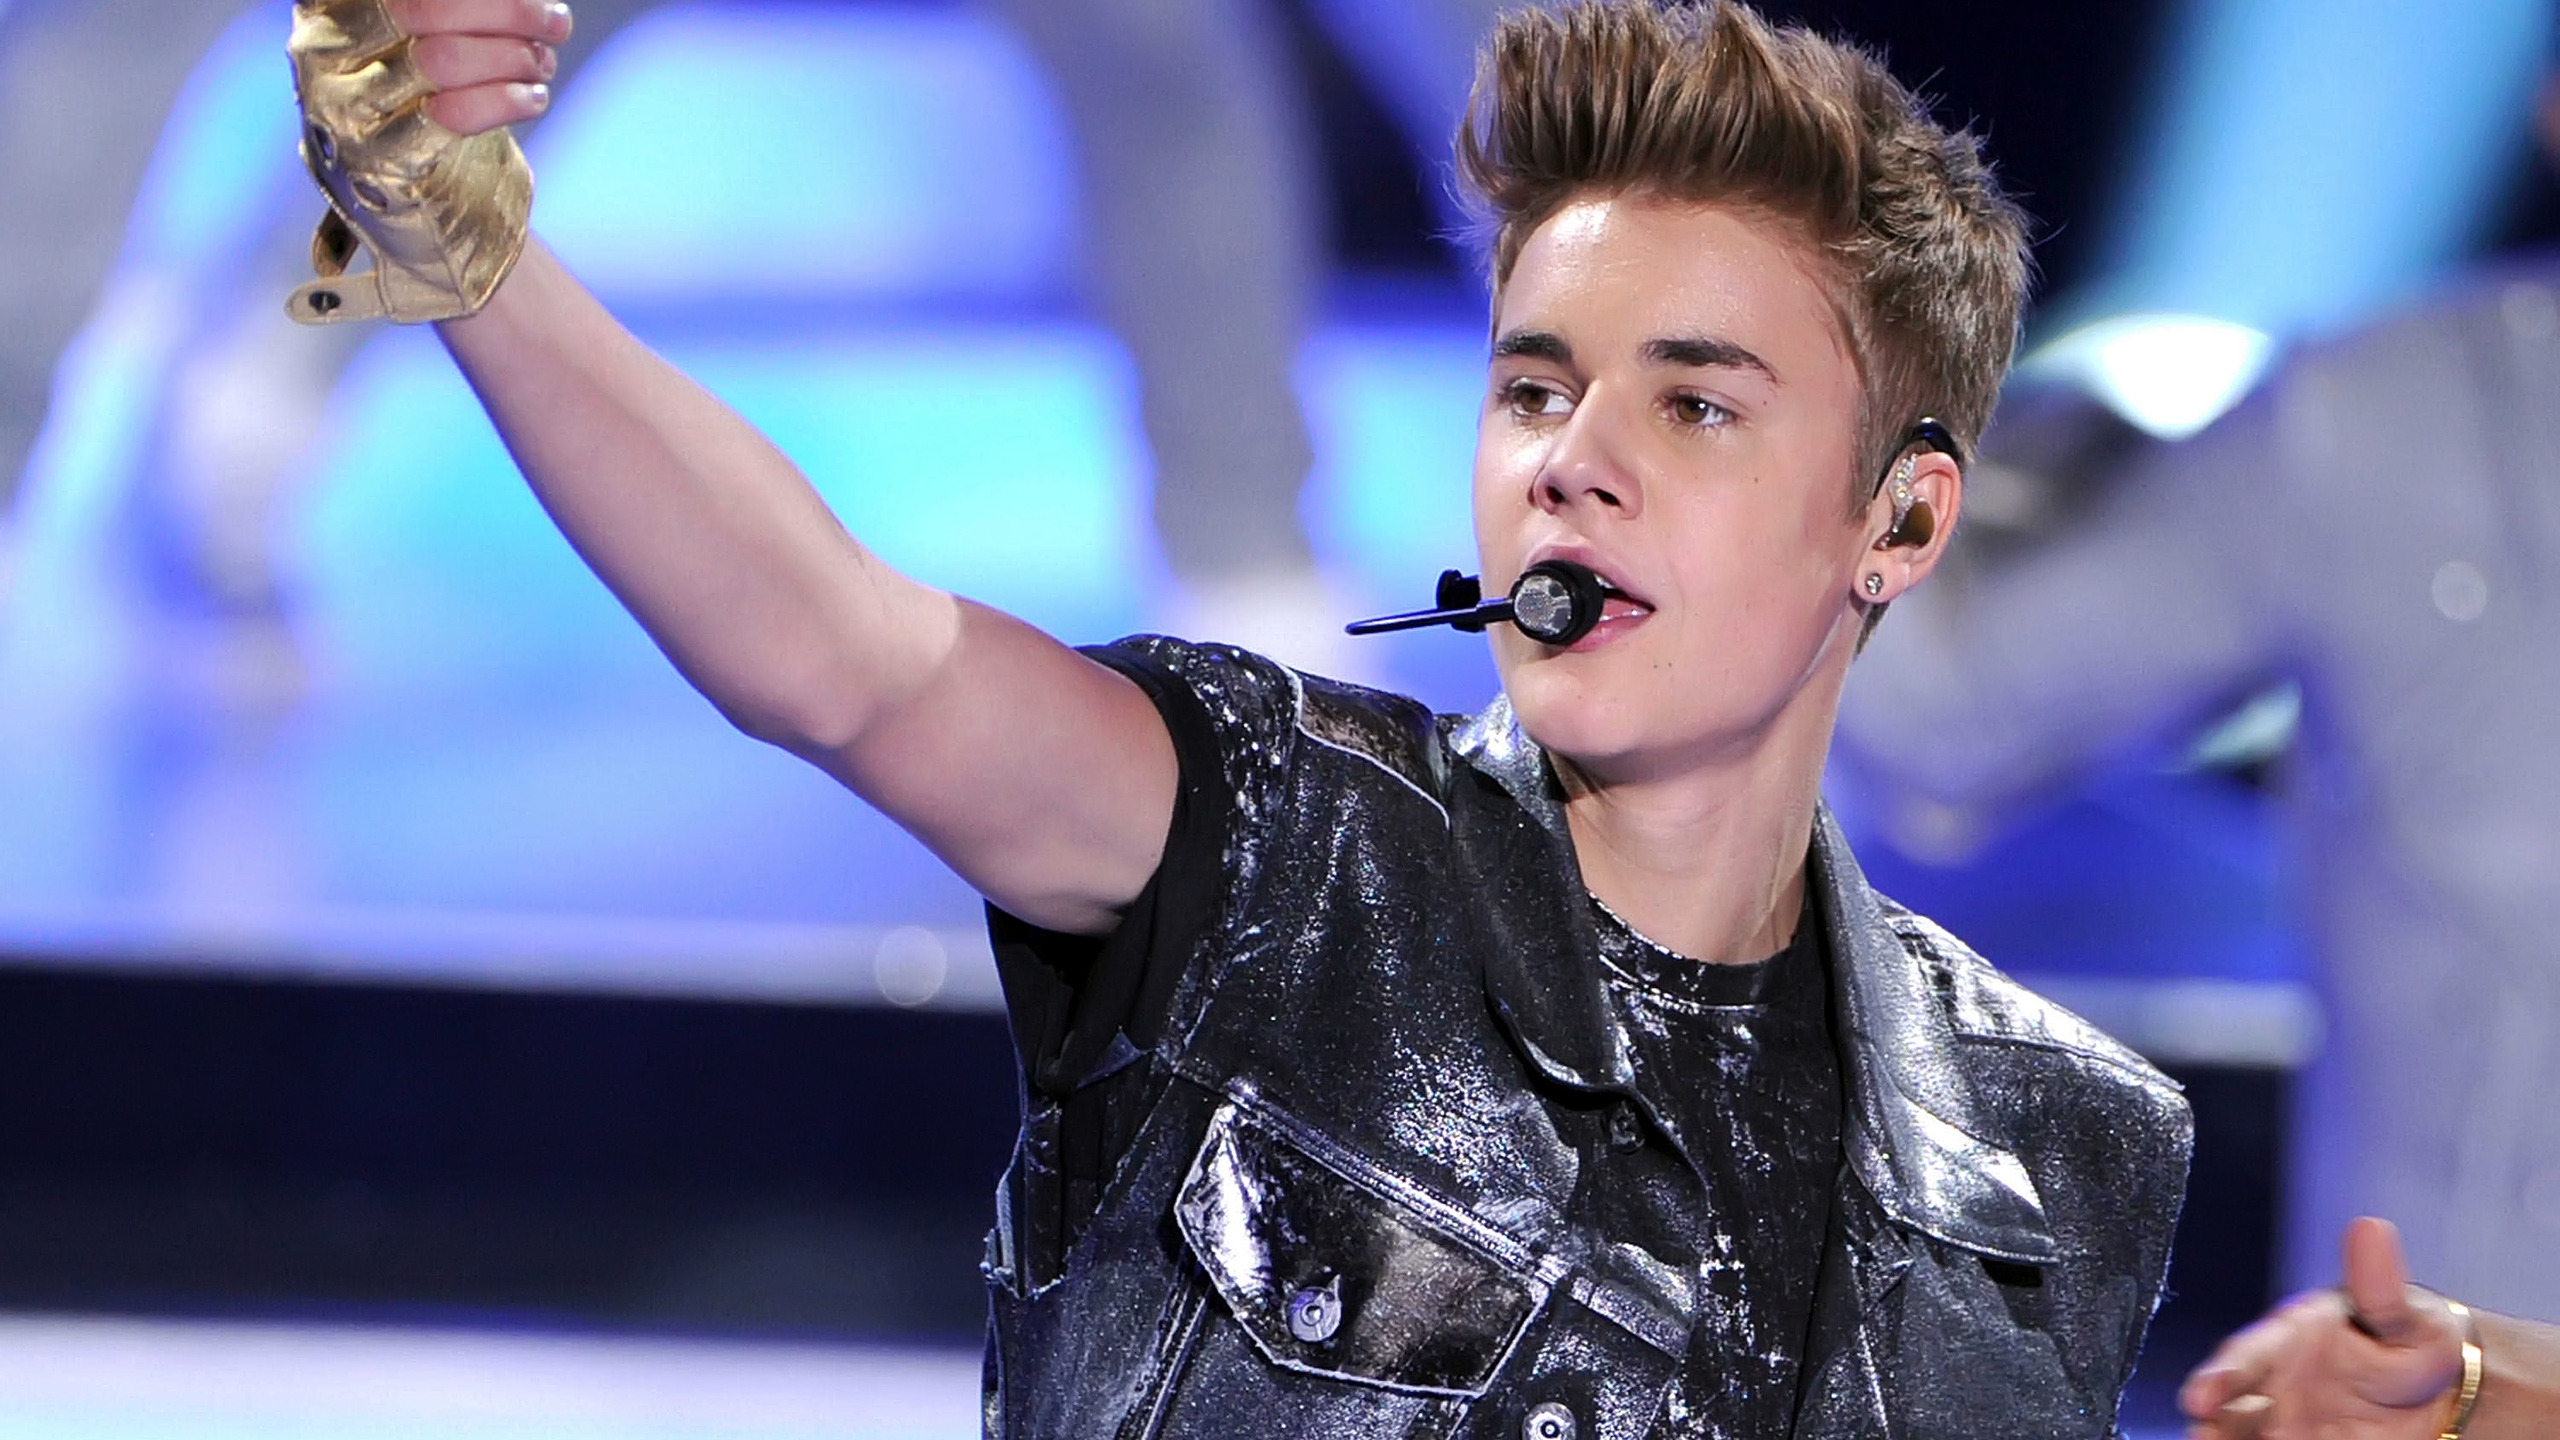 Justin Bieber on Stage for 2560x1440 HDTV resolution